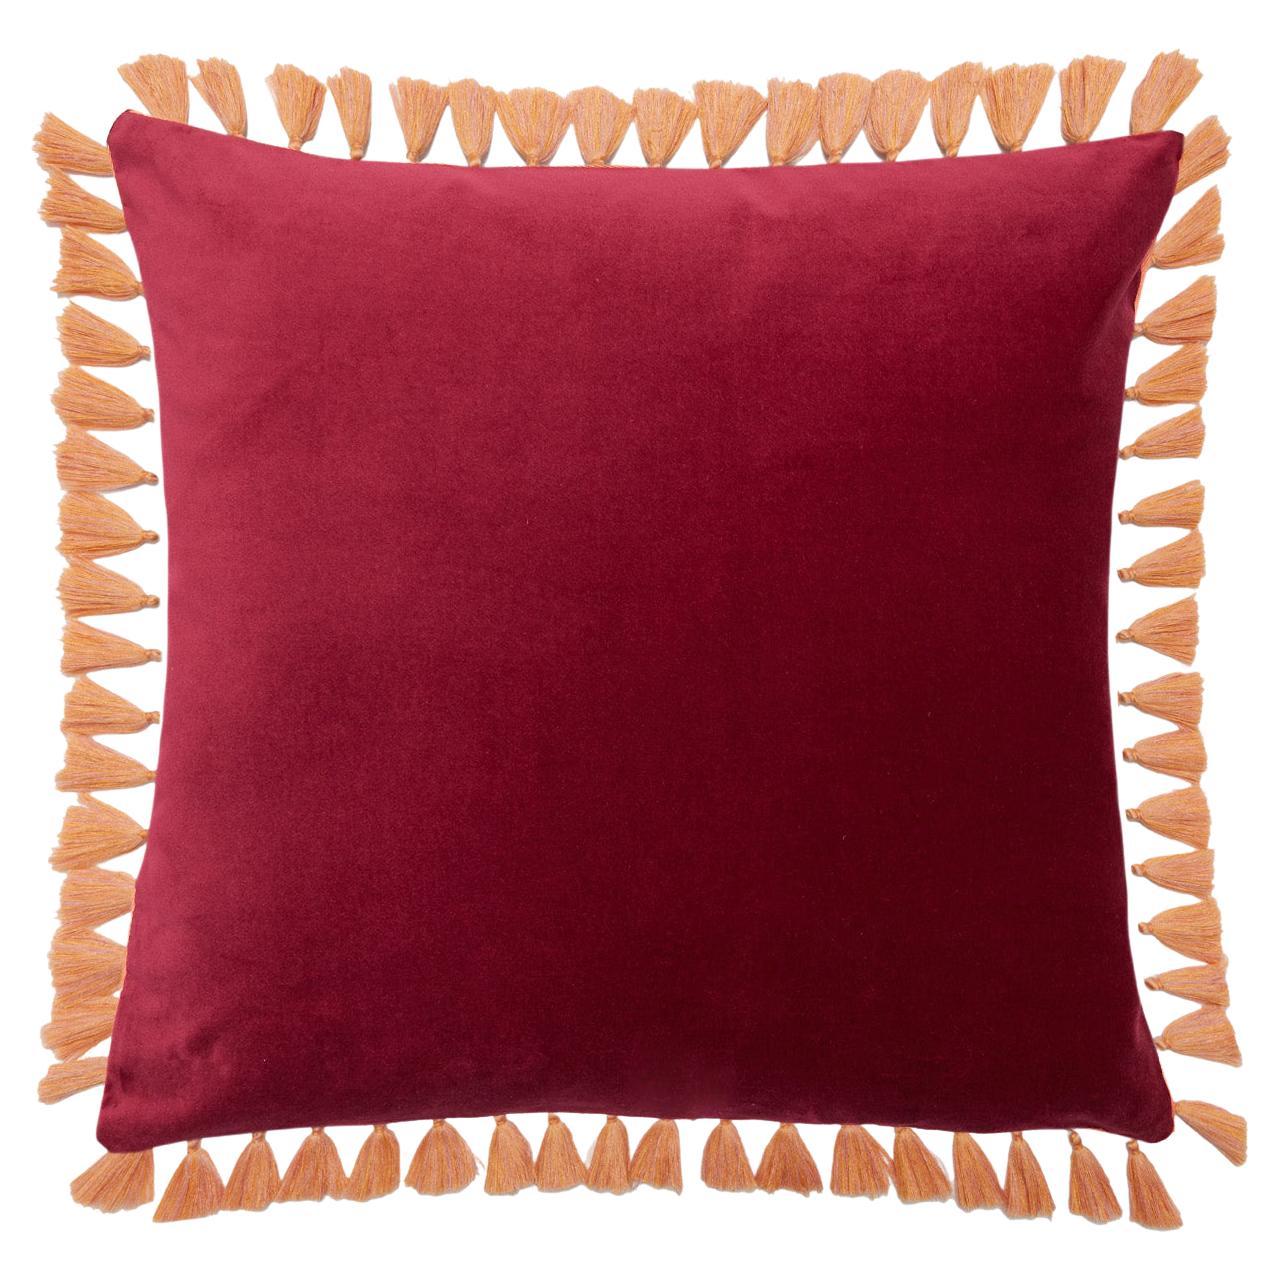 Let this luxurious Italian-made spirit animal cushion cover brighten your couch and uplift your soul. With a silky fringe tassel trim, it features a funky cricket (the luckiest, happiest and most positive spirit animal in the kingdom) printed onto